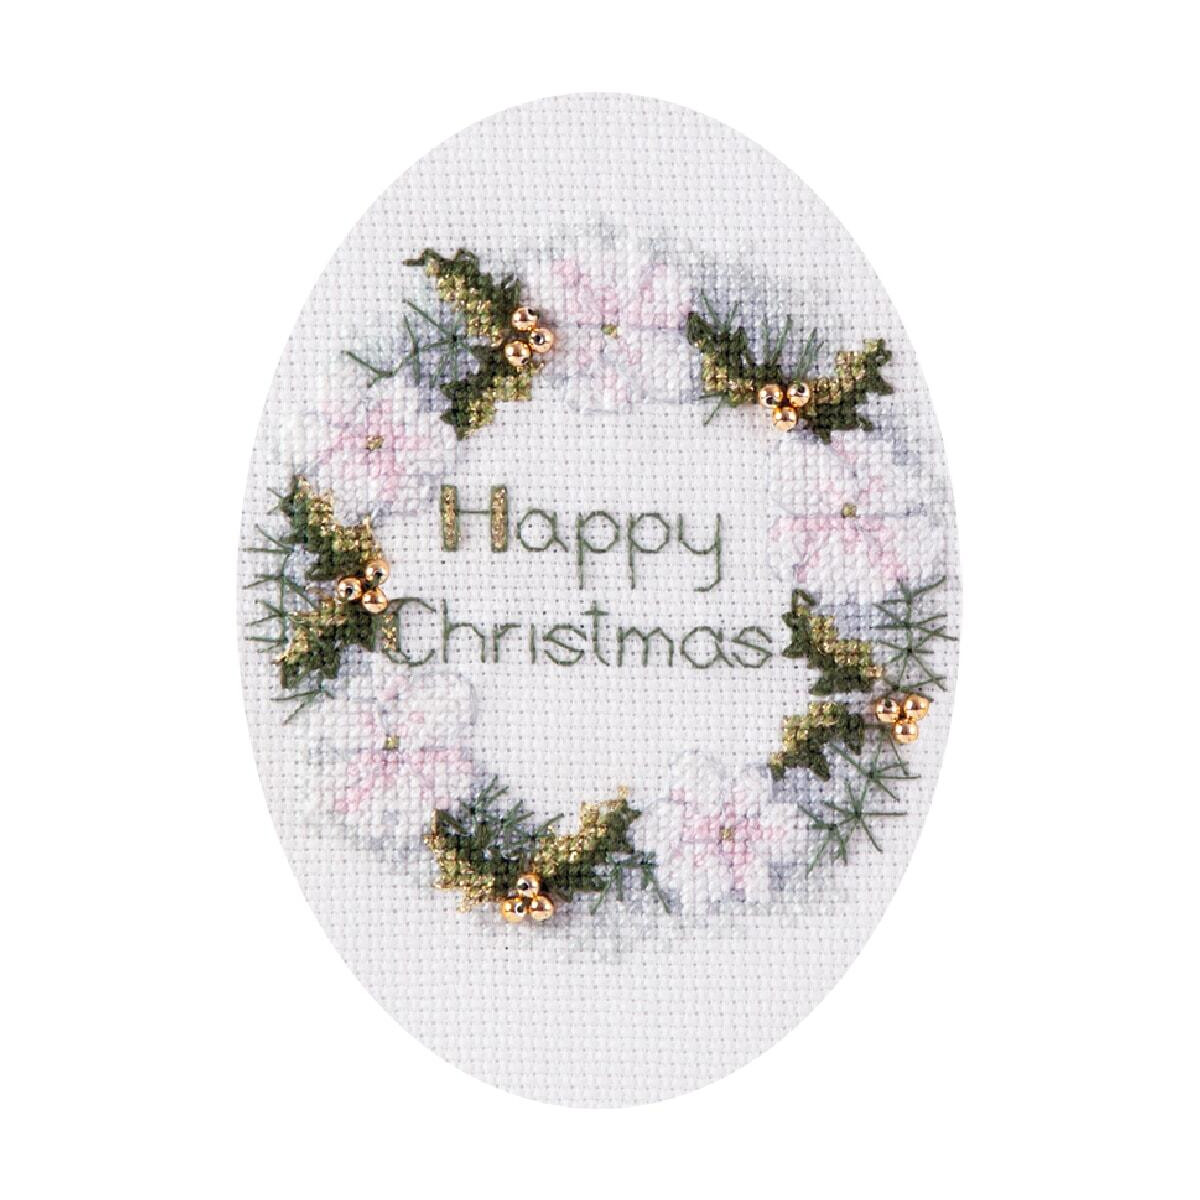 An oval-shaped piece of embroidery shows a festive wreath...